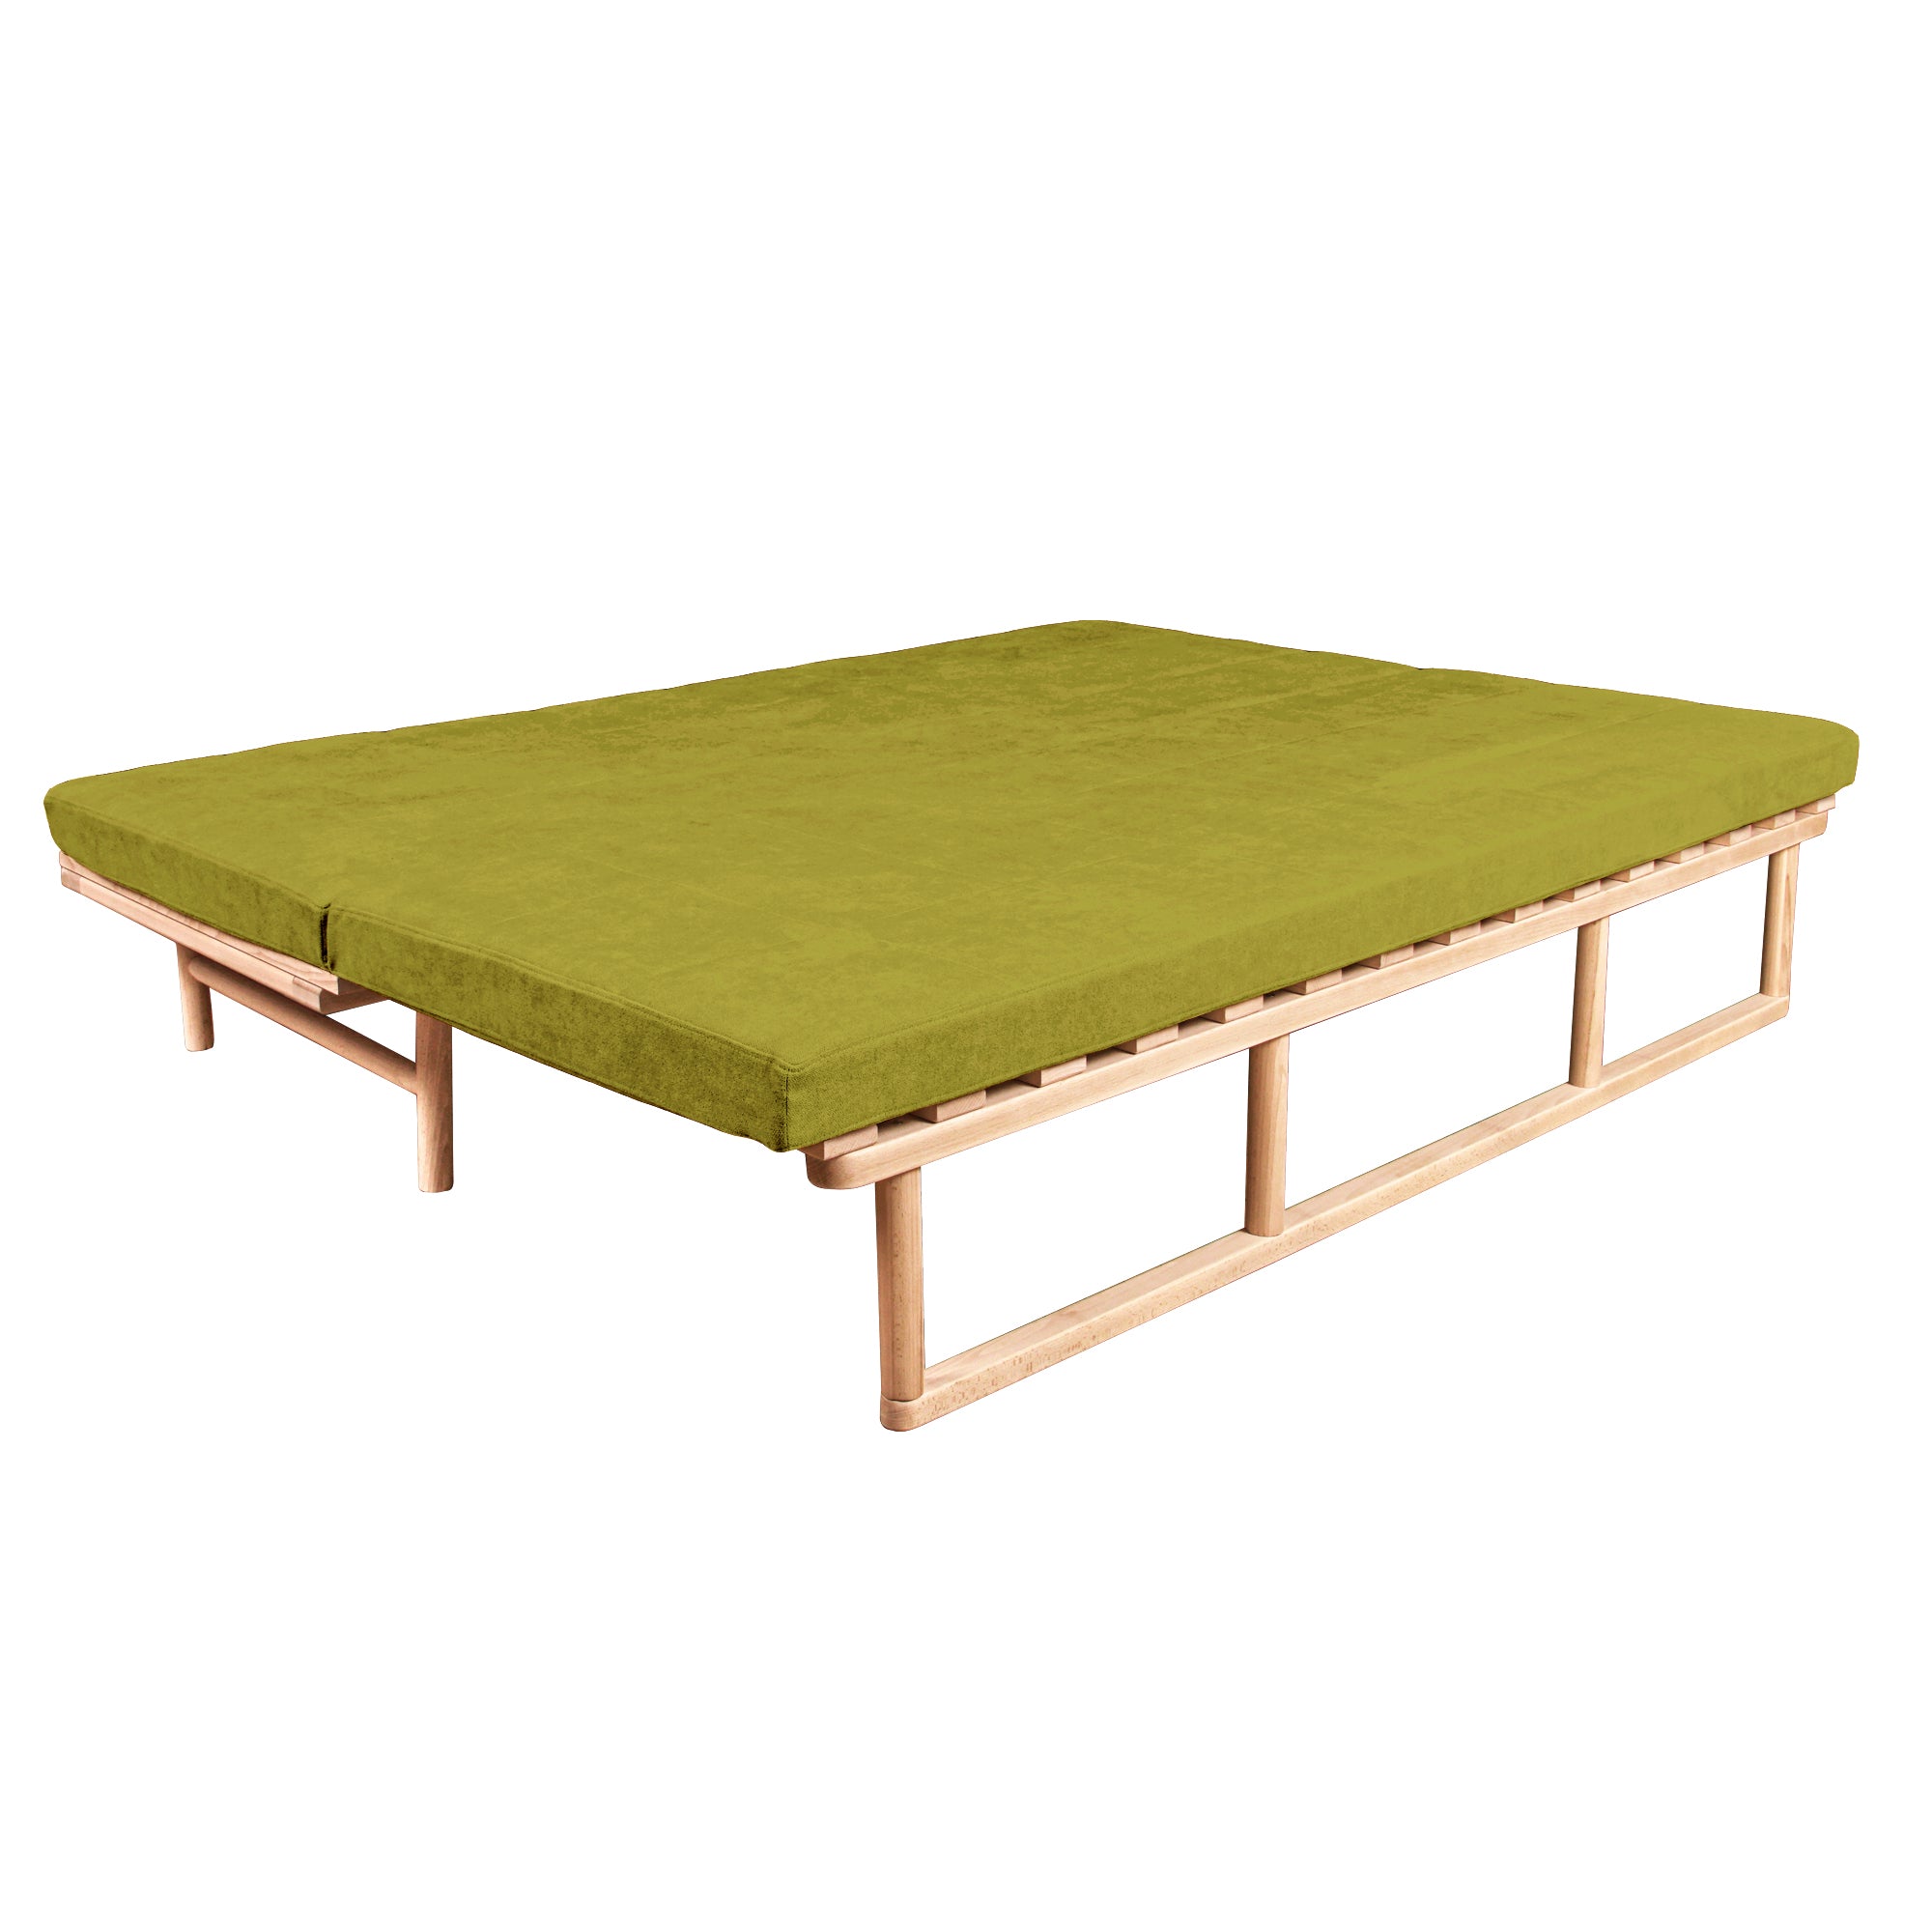 Le MAR Folding Daybed, Beech Wood Frame, Natural Colour-upholstery green folded view